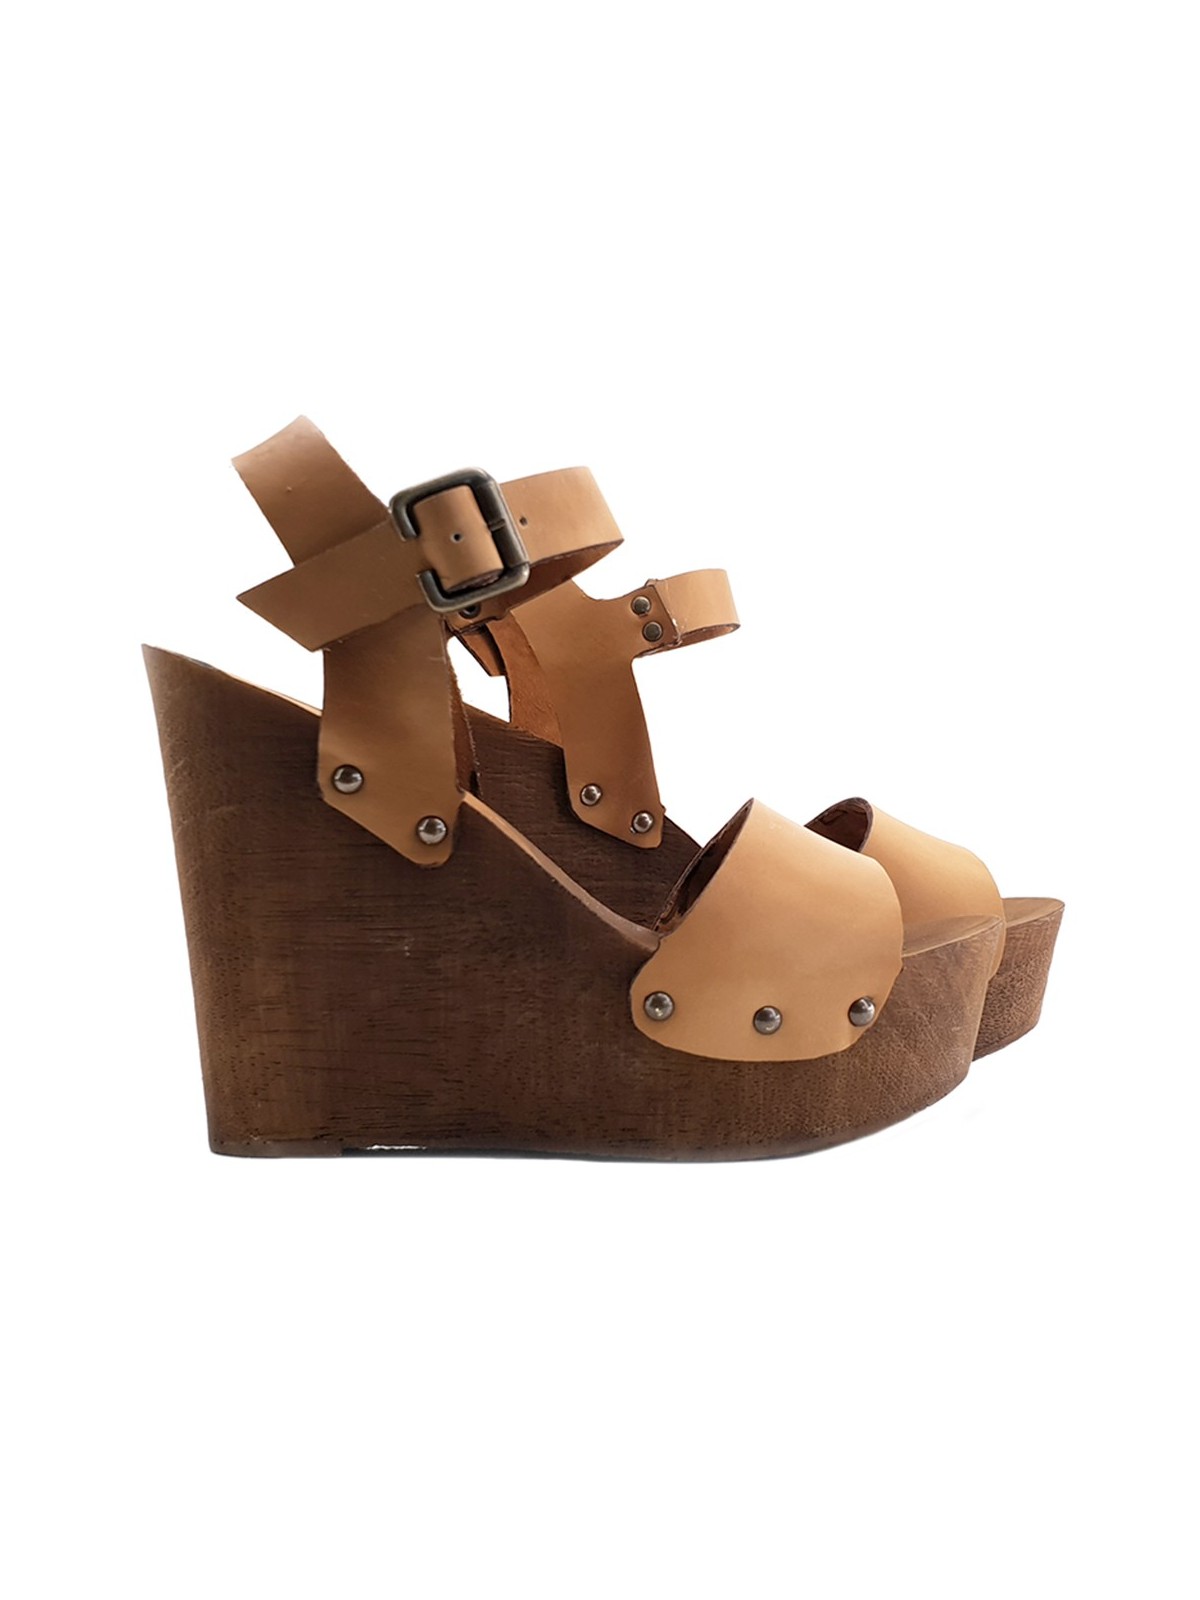 LEATHER WEDGE CLOGS